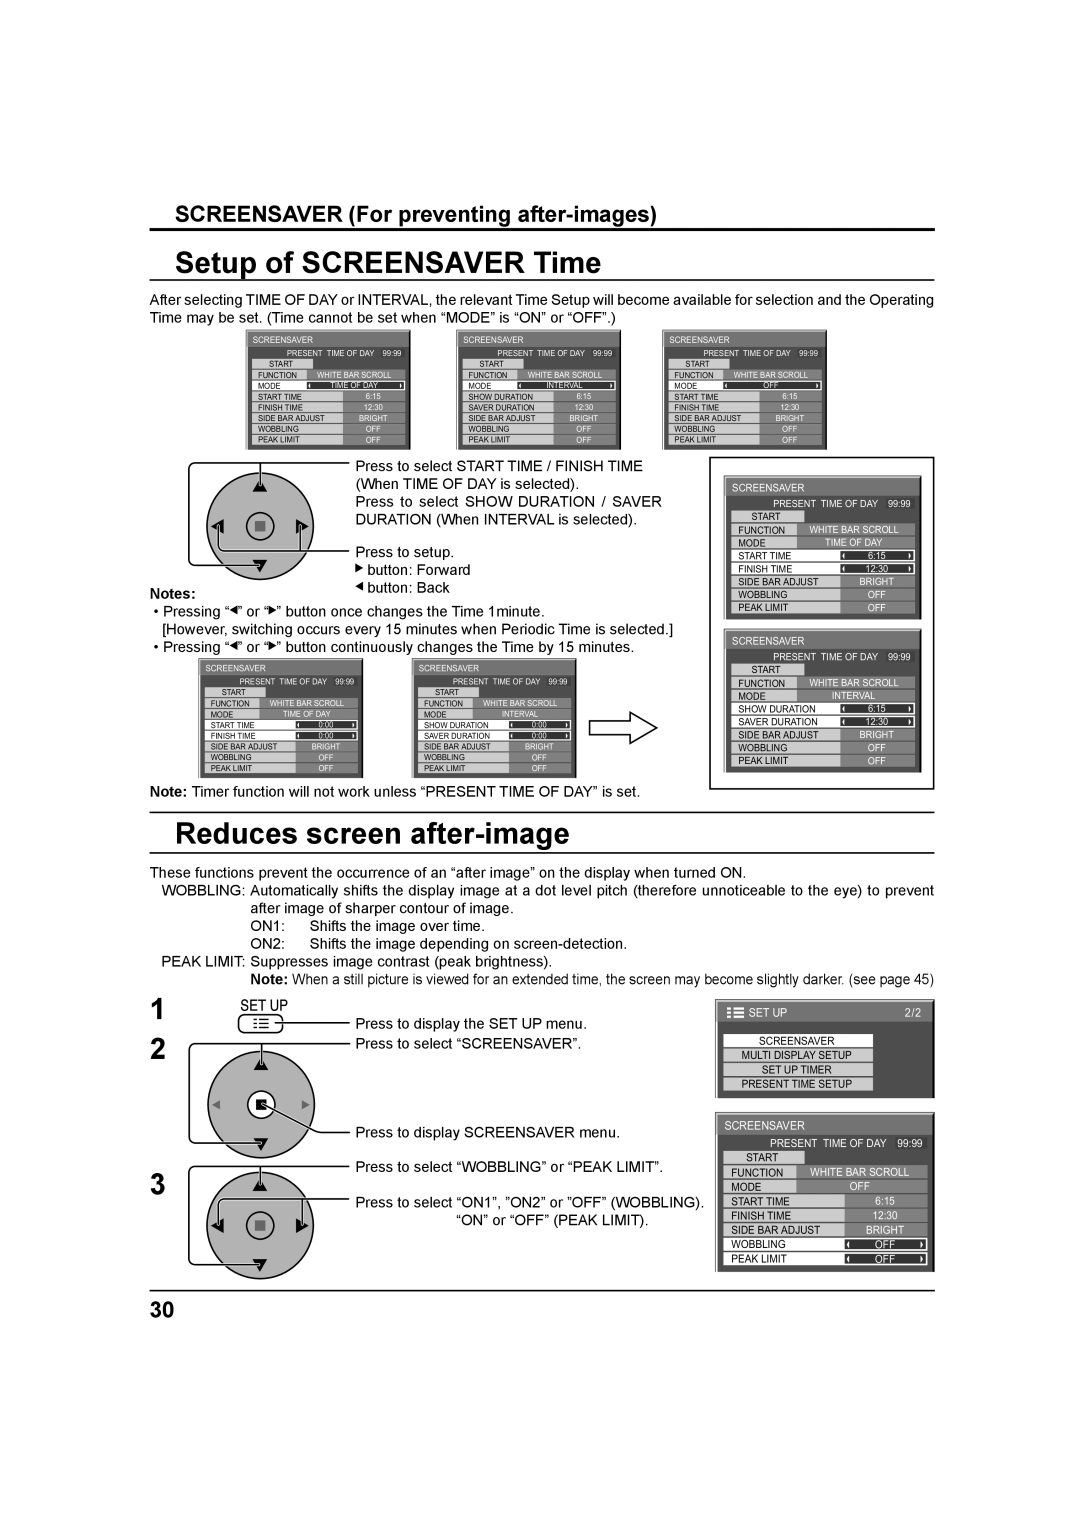 Panasonic TH-37PH9UK Setup of Screensaver Time, Reduces screen after-image, Screensaver For preventing after-images 